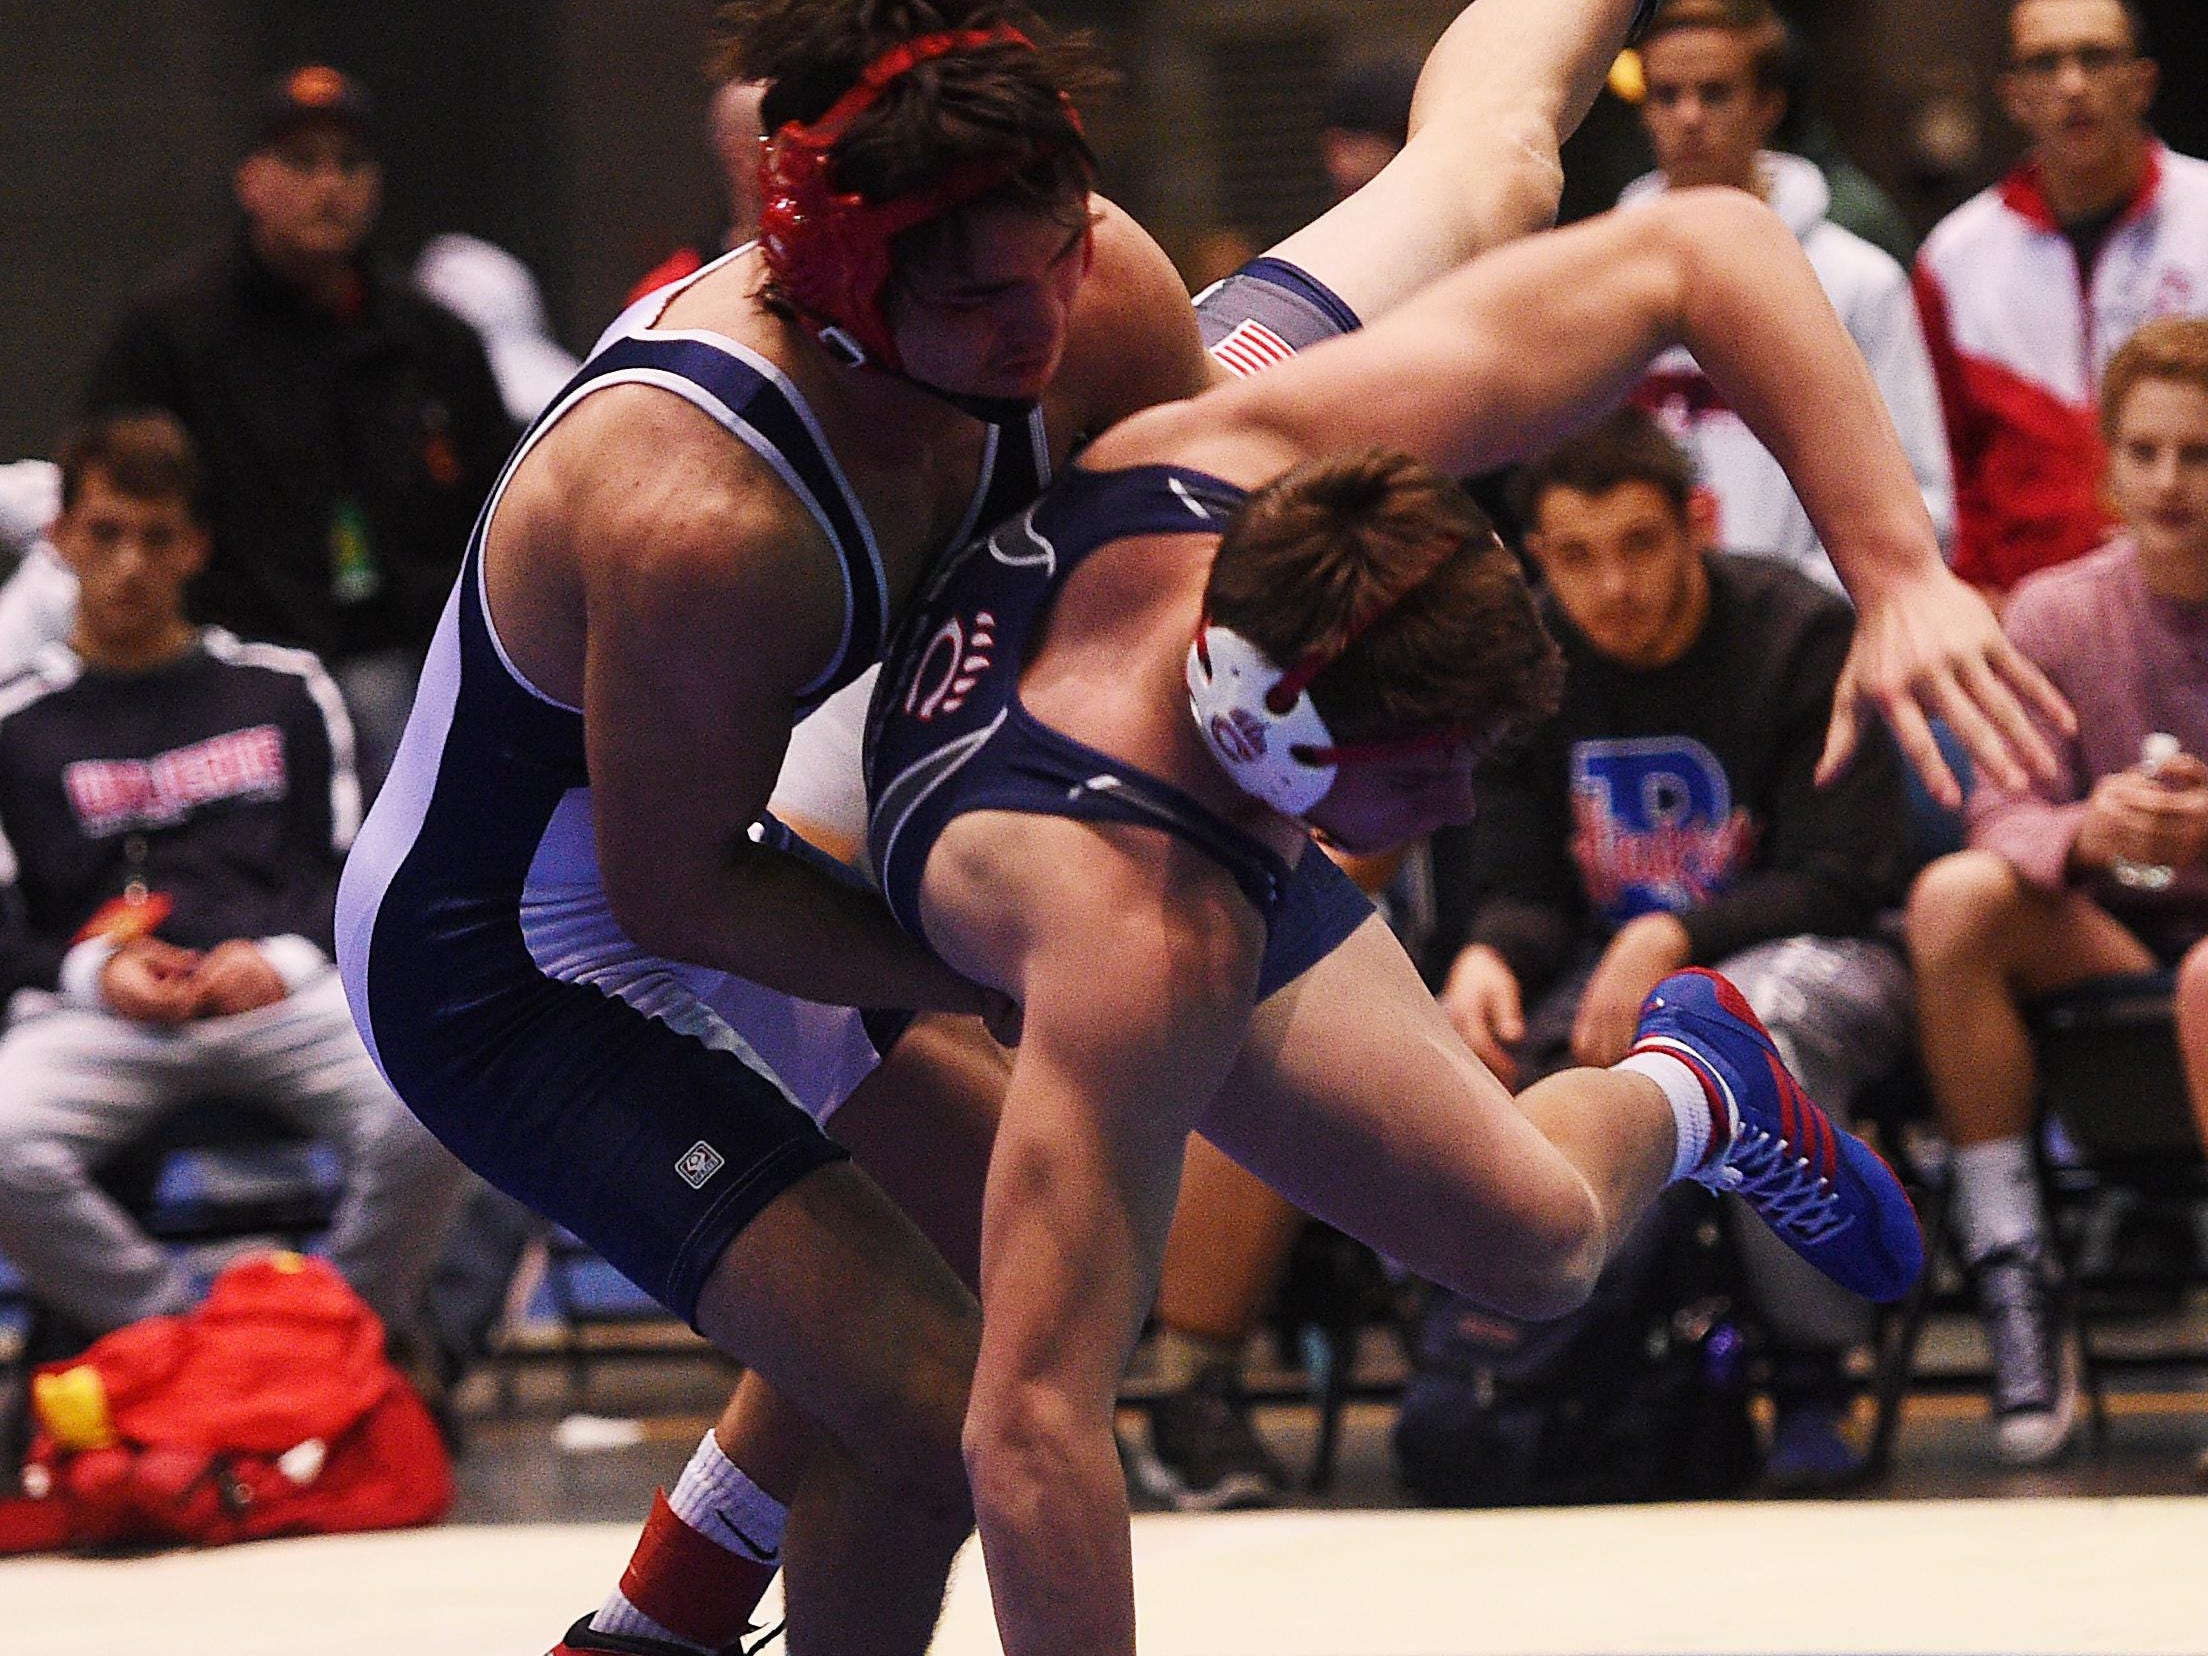 Wrestling Pair of Northern Nevadans win titles at RTOC USA TODAY